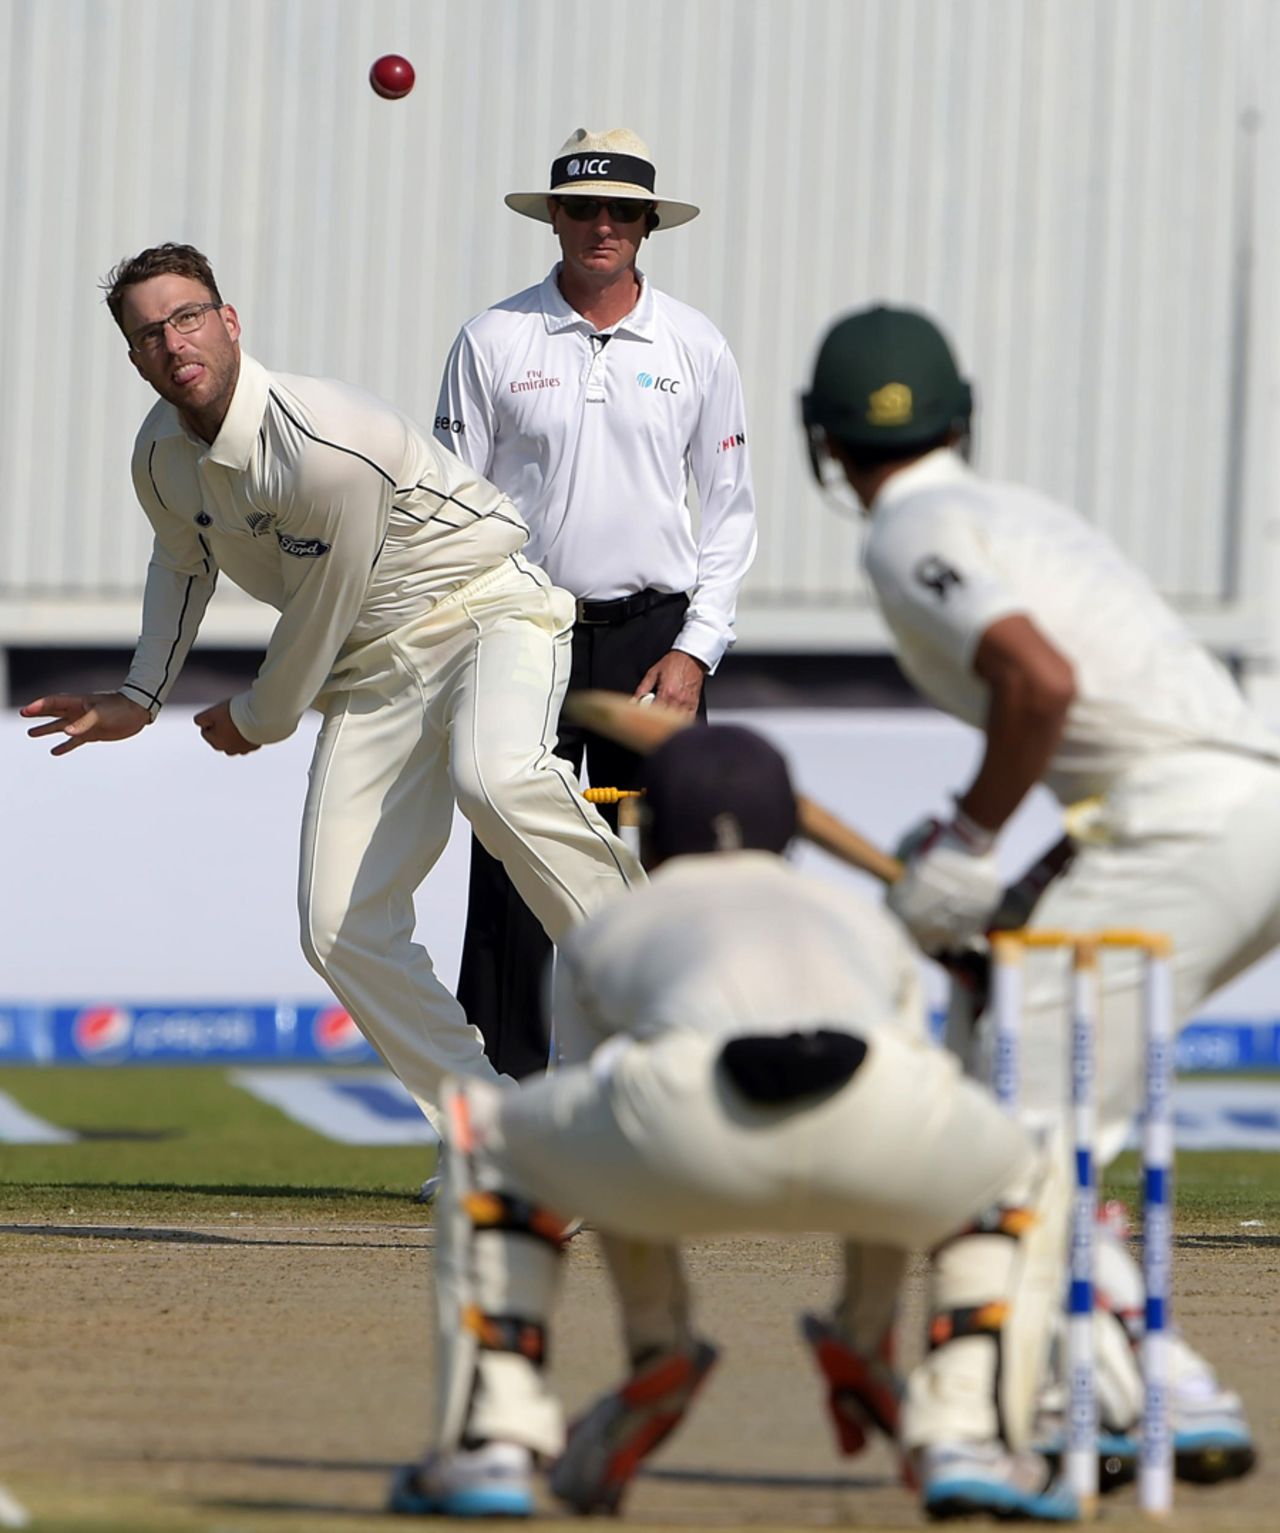 Daniel Vettori was playing his first Test in two years and four months, Pakistan v New Zealand, 3rd Test, Sharjah, 1st day, November 26, 2014